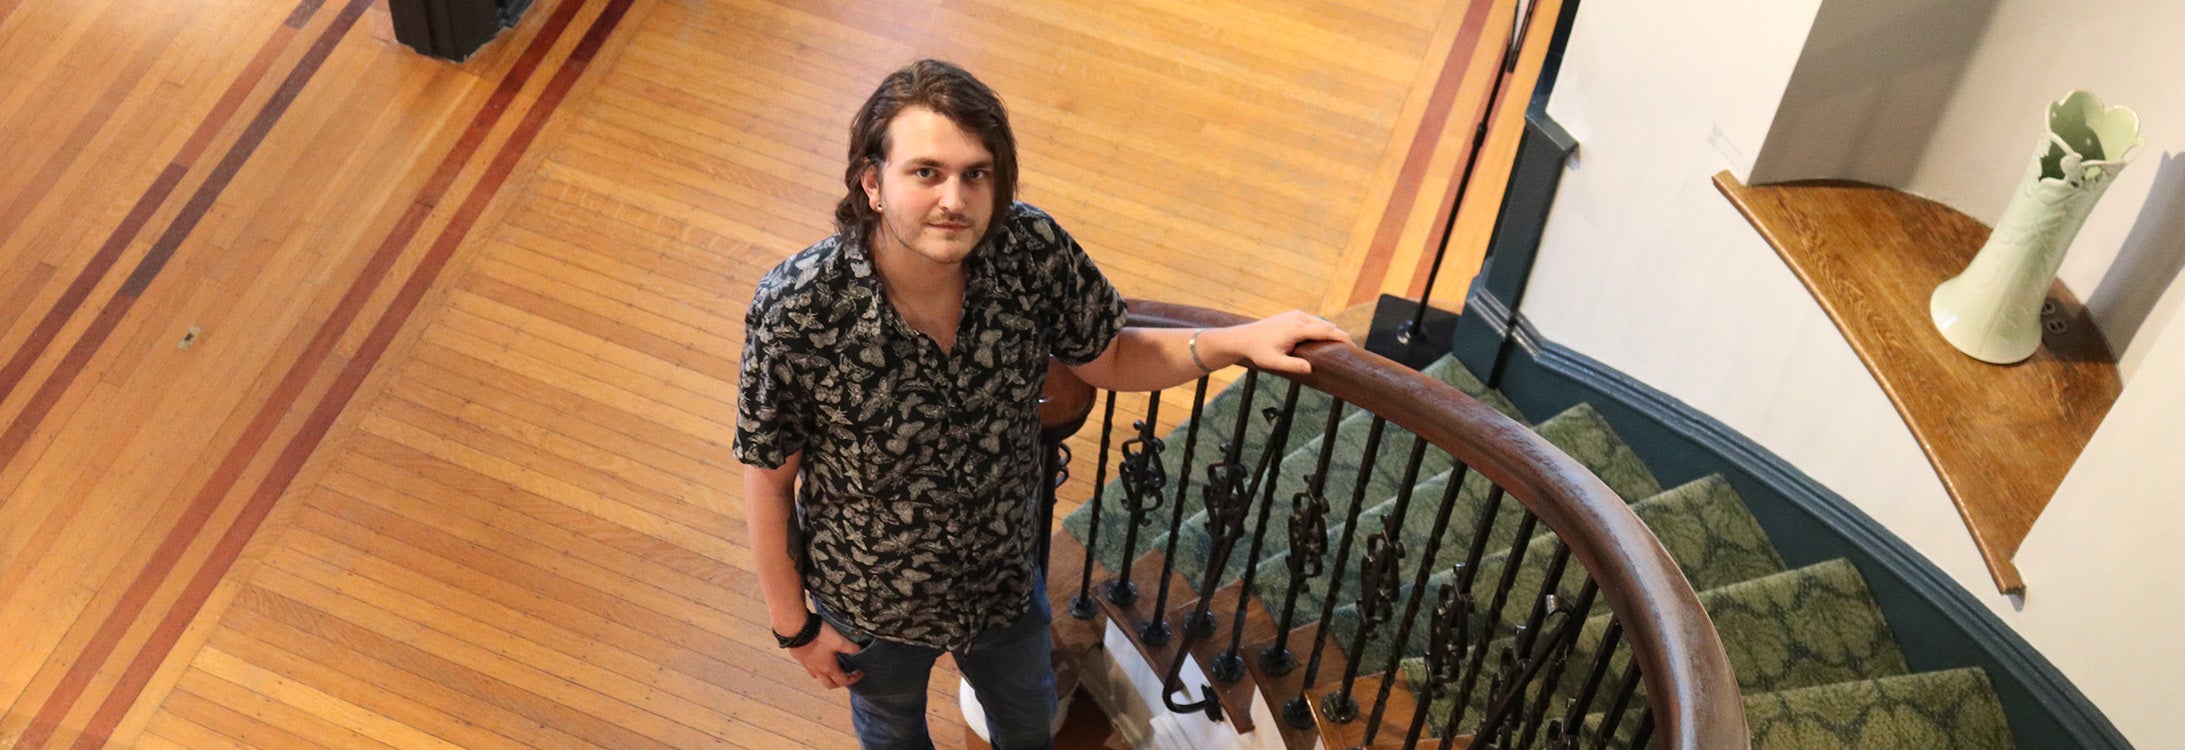 East Carolina University fine arts major Ashr Burgess uses photography skills he learned in class to help the Greenville Museum of Art in their mission.